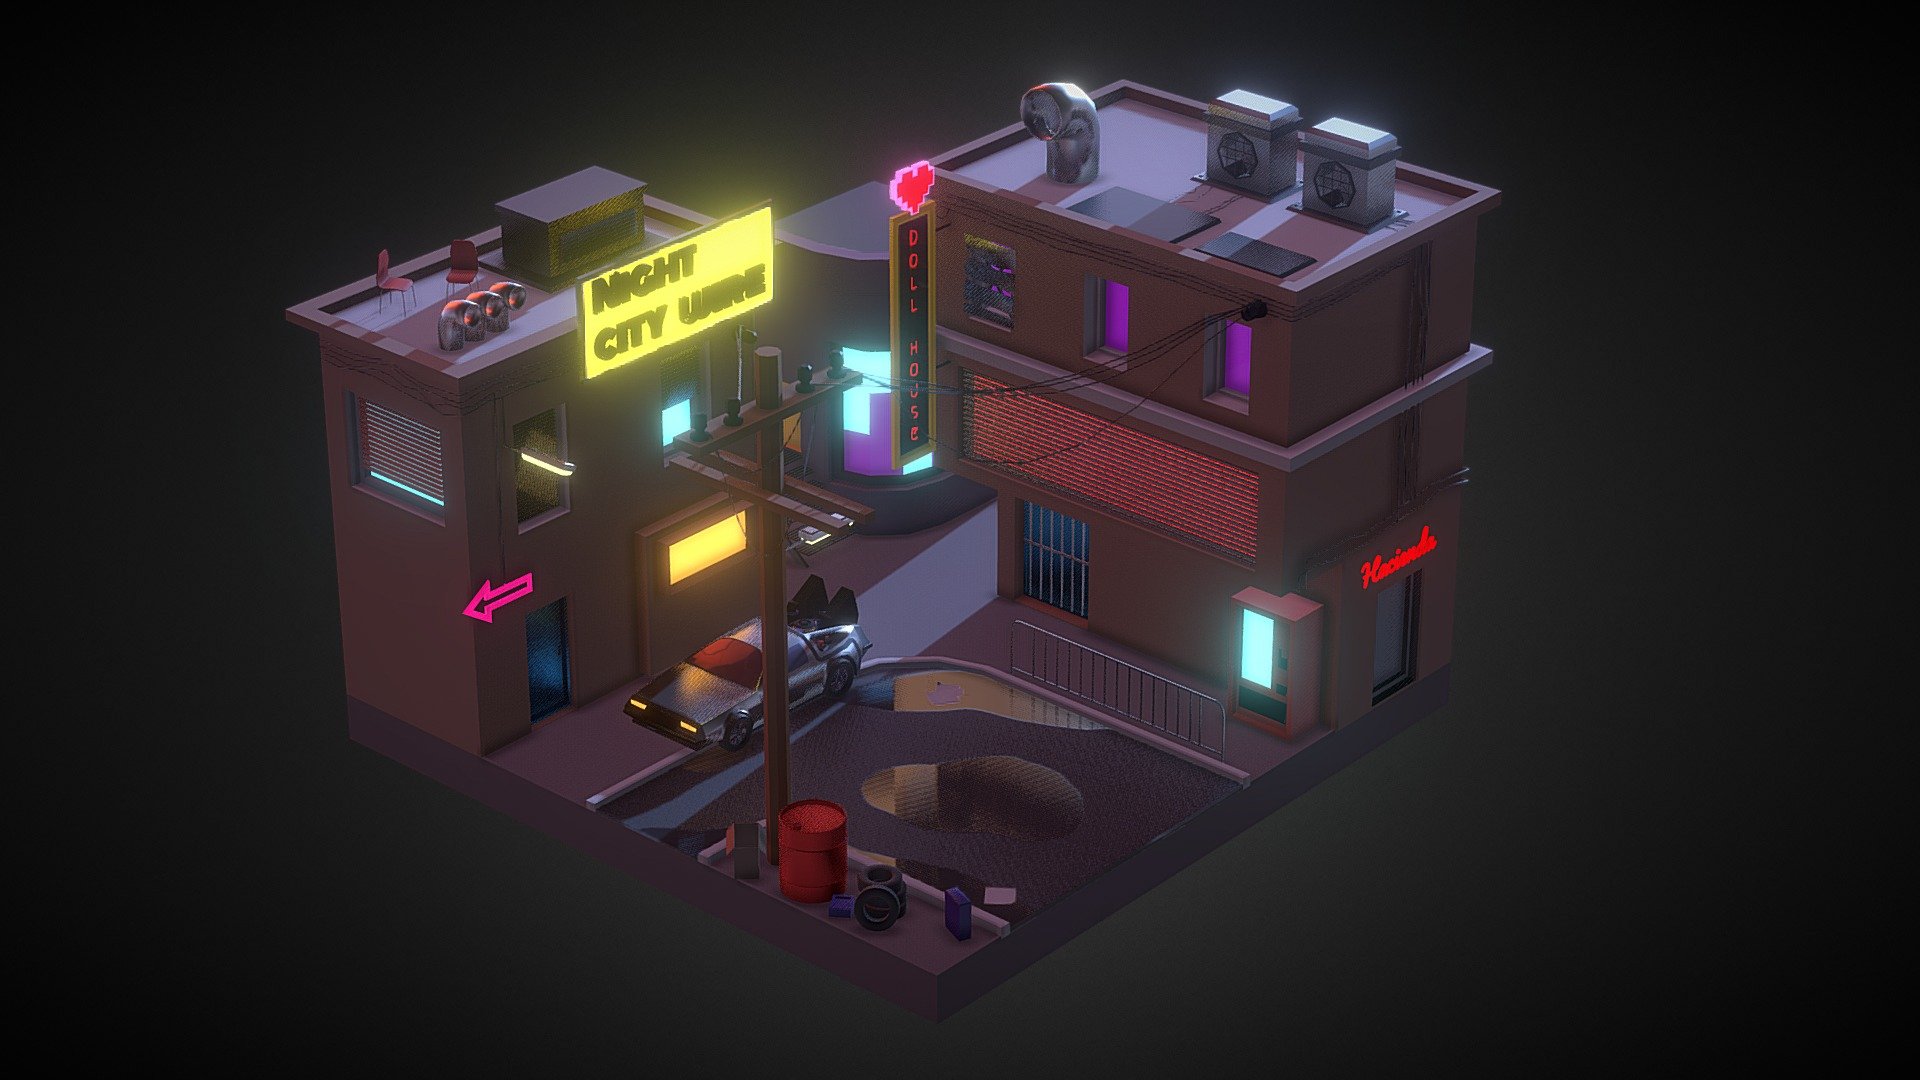 District of some cyberpunk city. High tech, low life :) Was created in accordance with Roman Klco tutorial 3d model